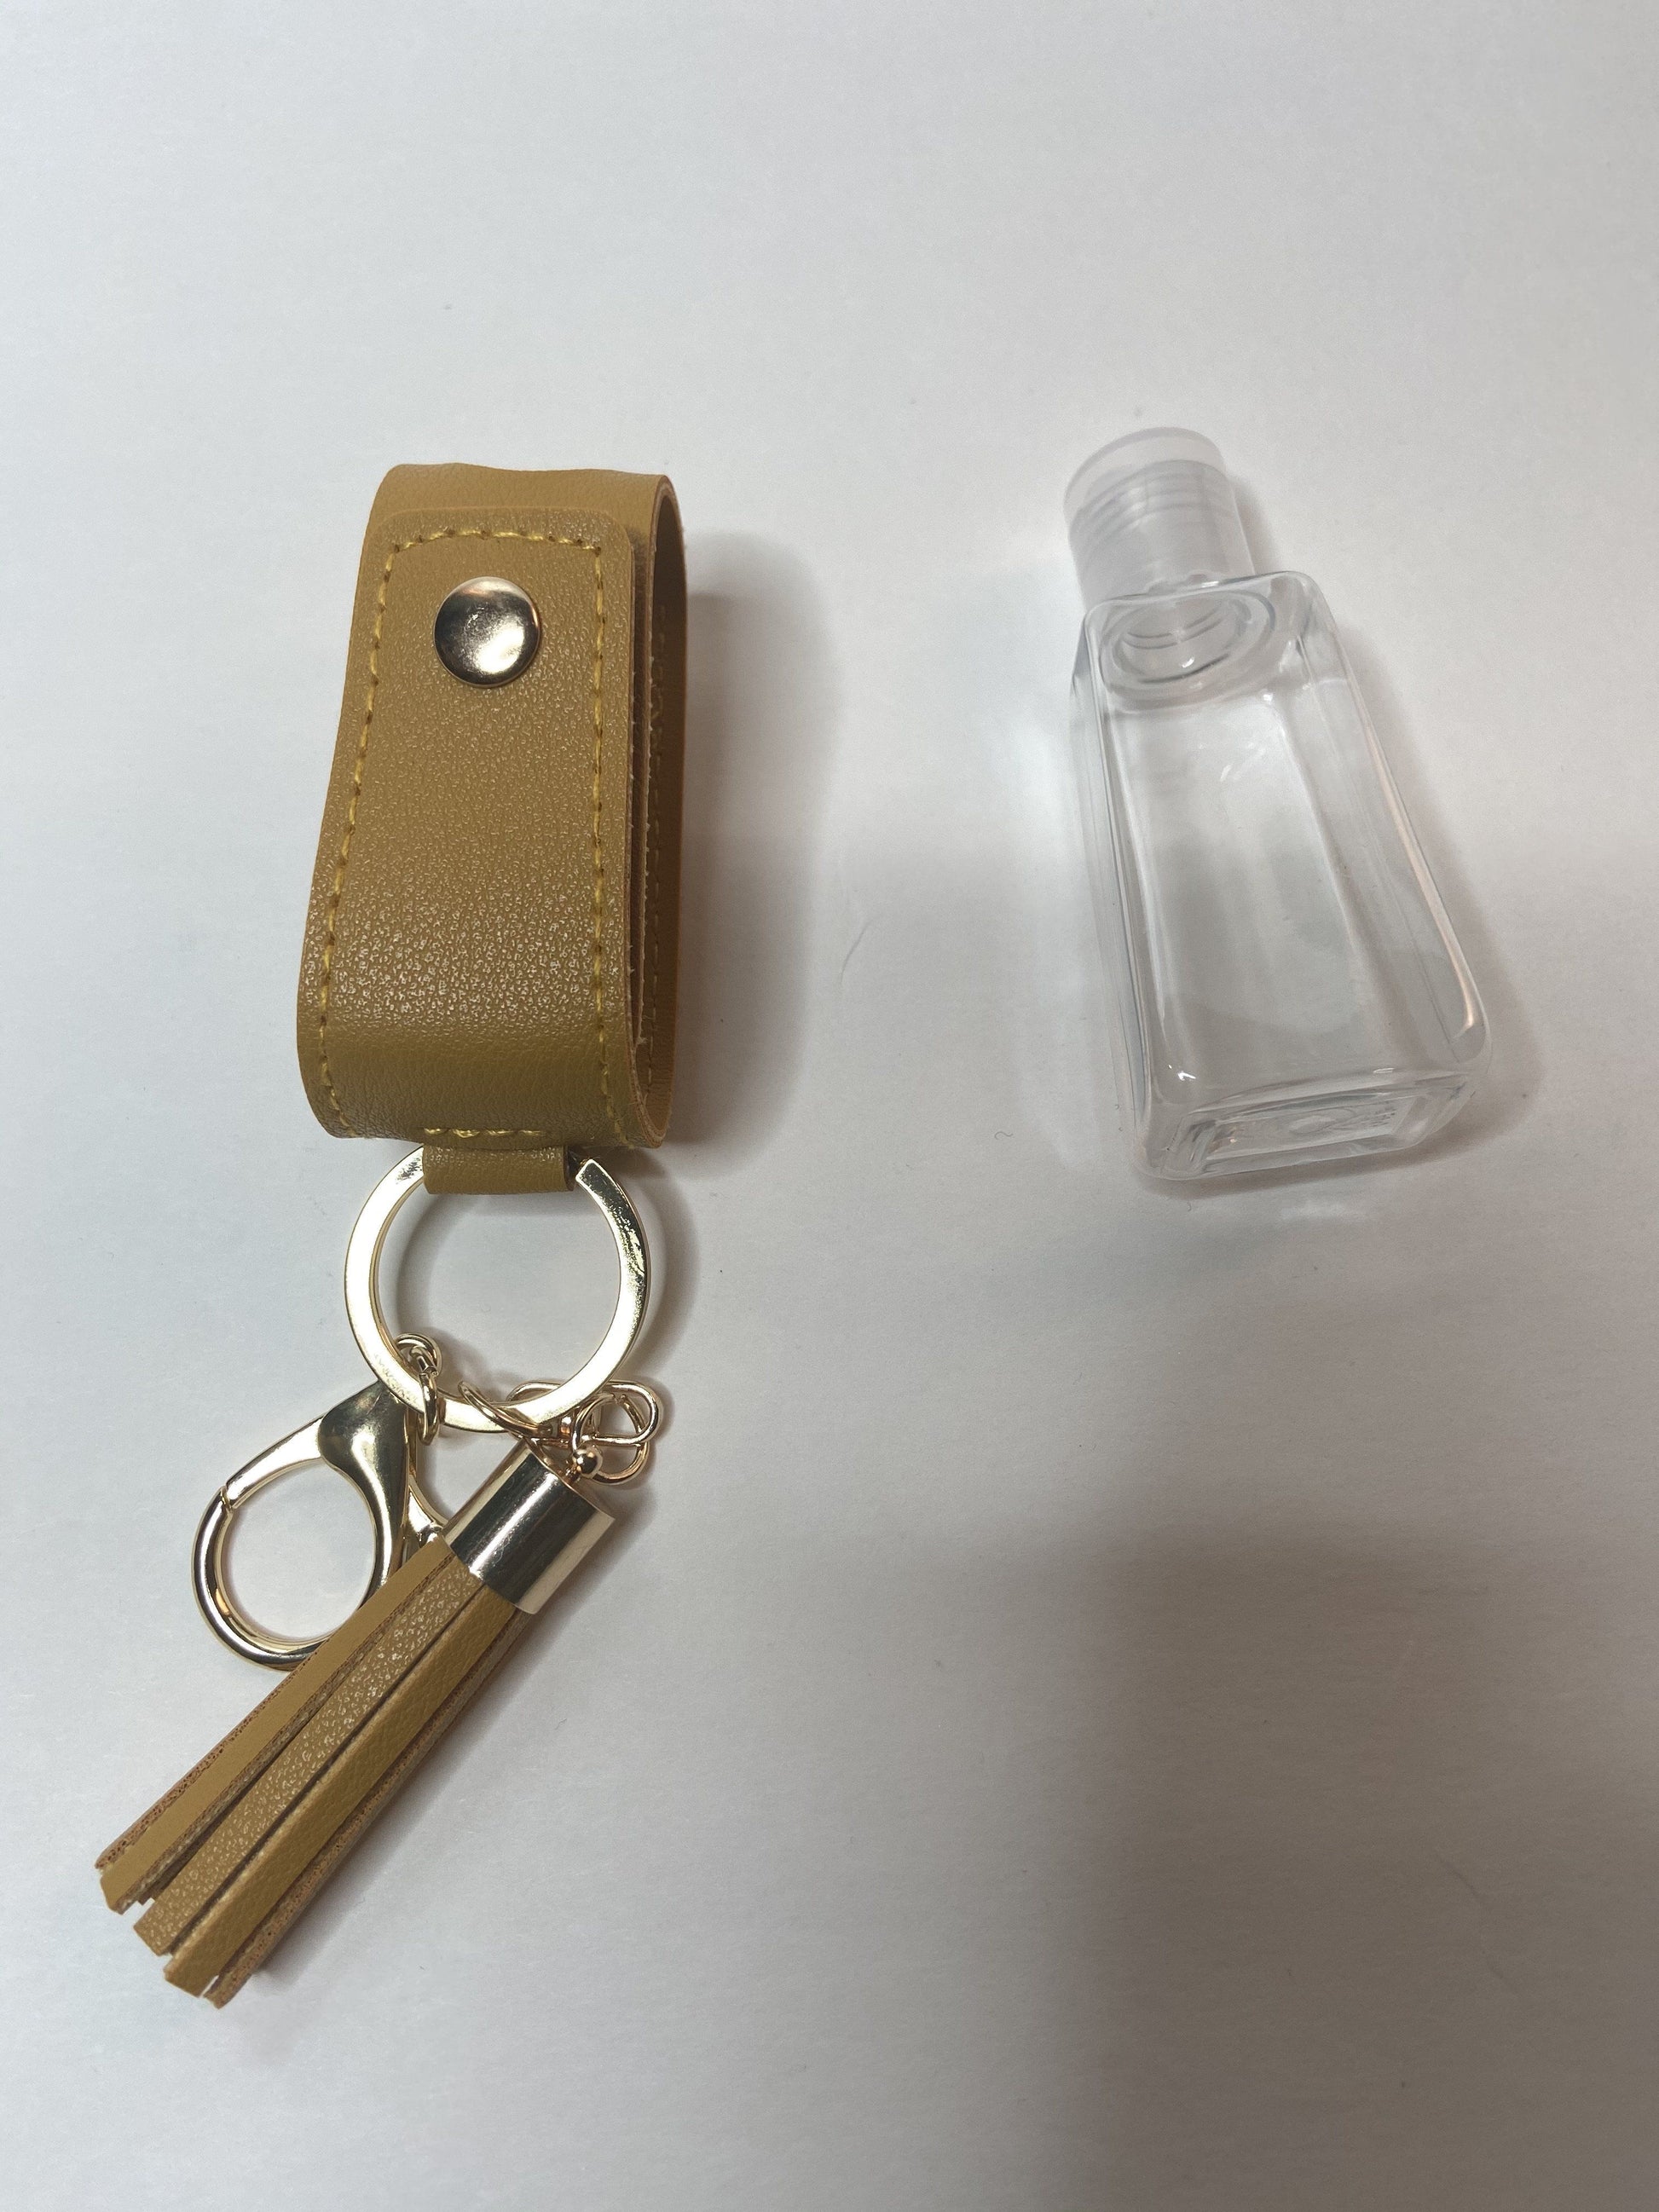 30Ml hand sanitizer leather keychain and empty bottle Annywhere 